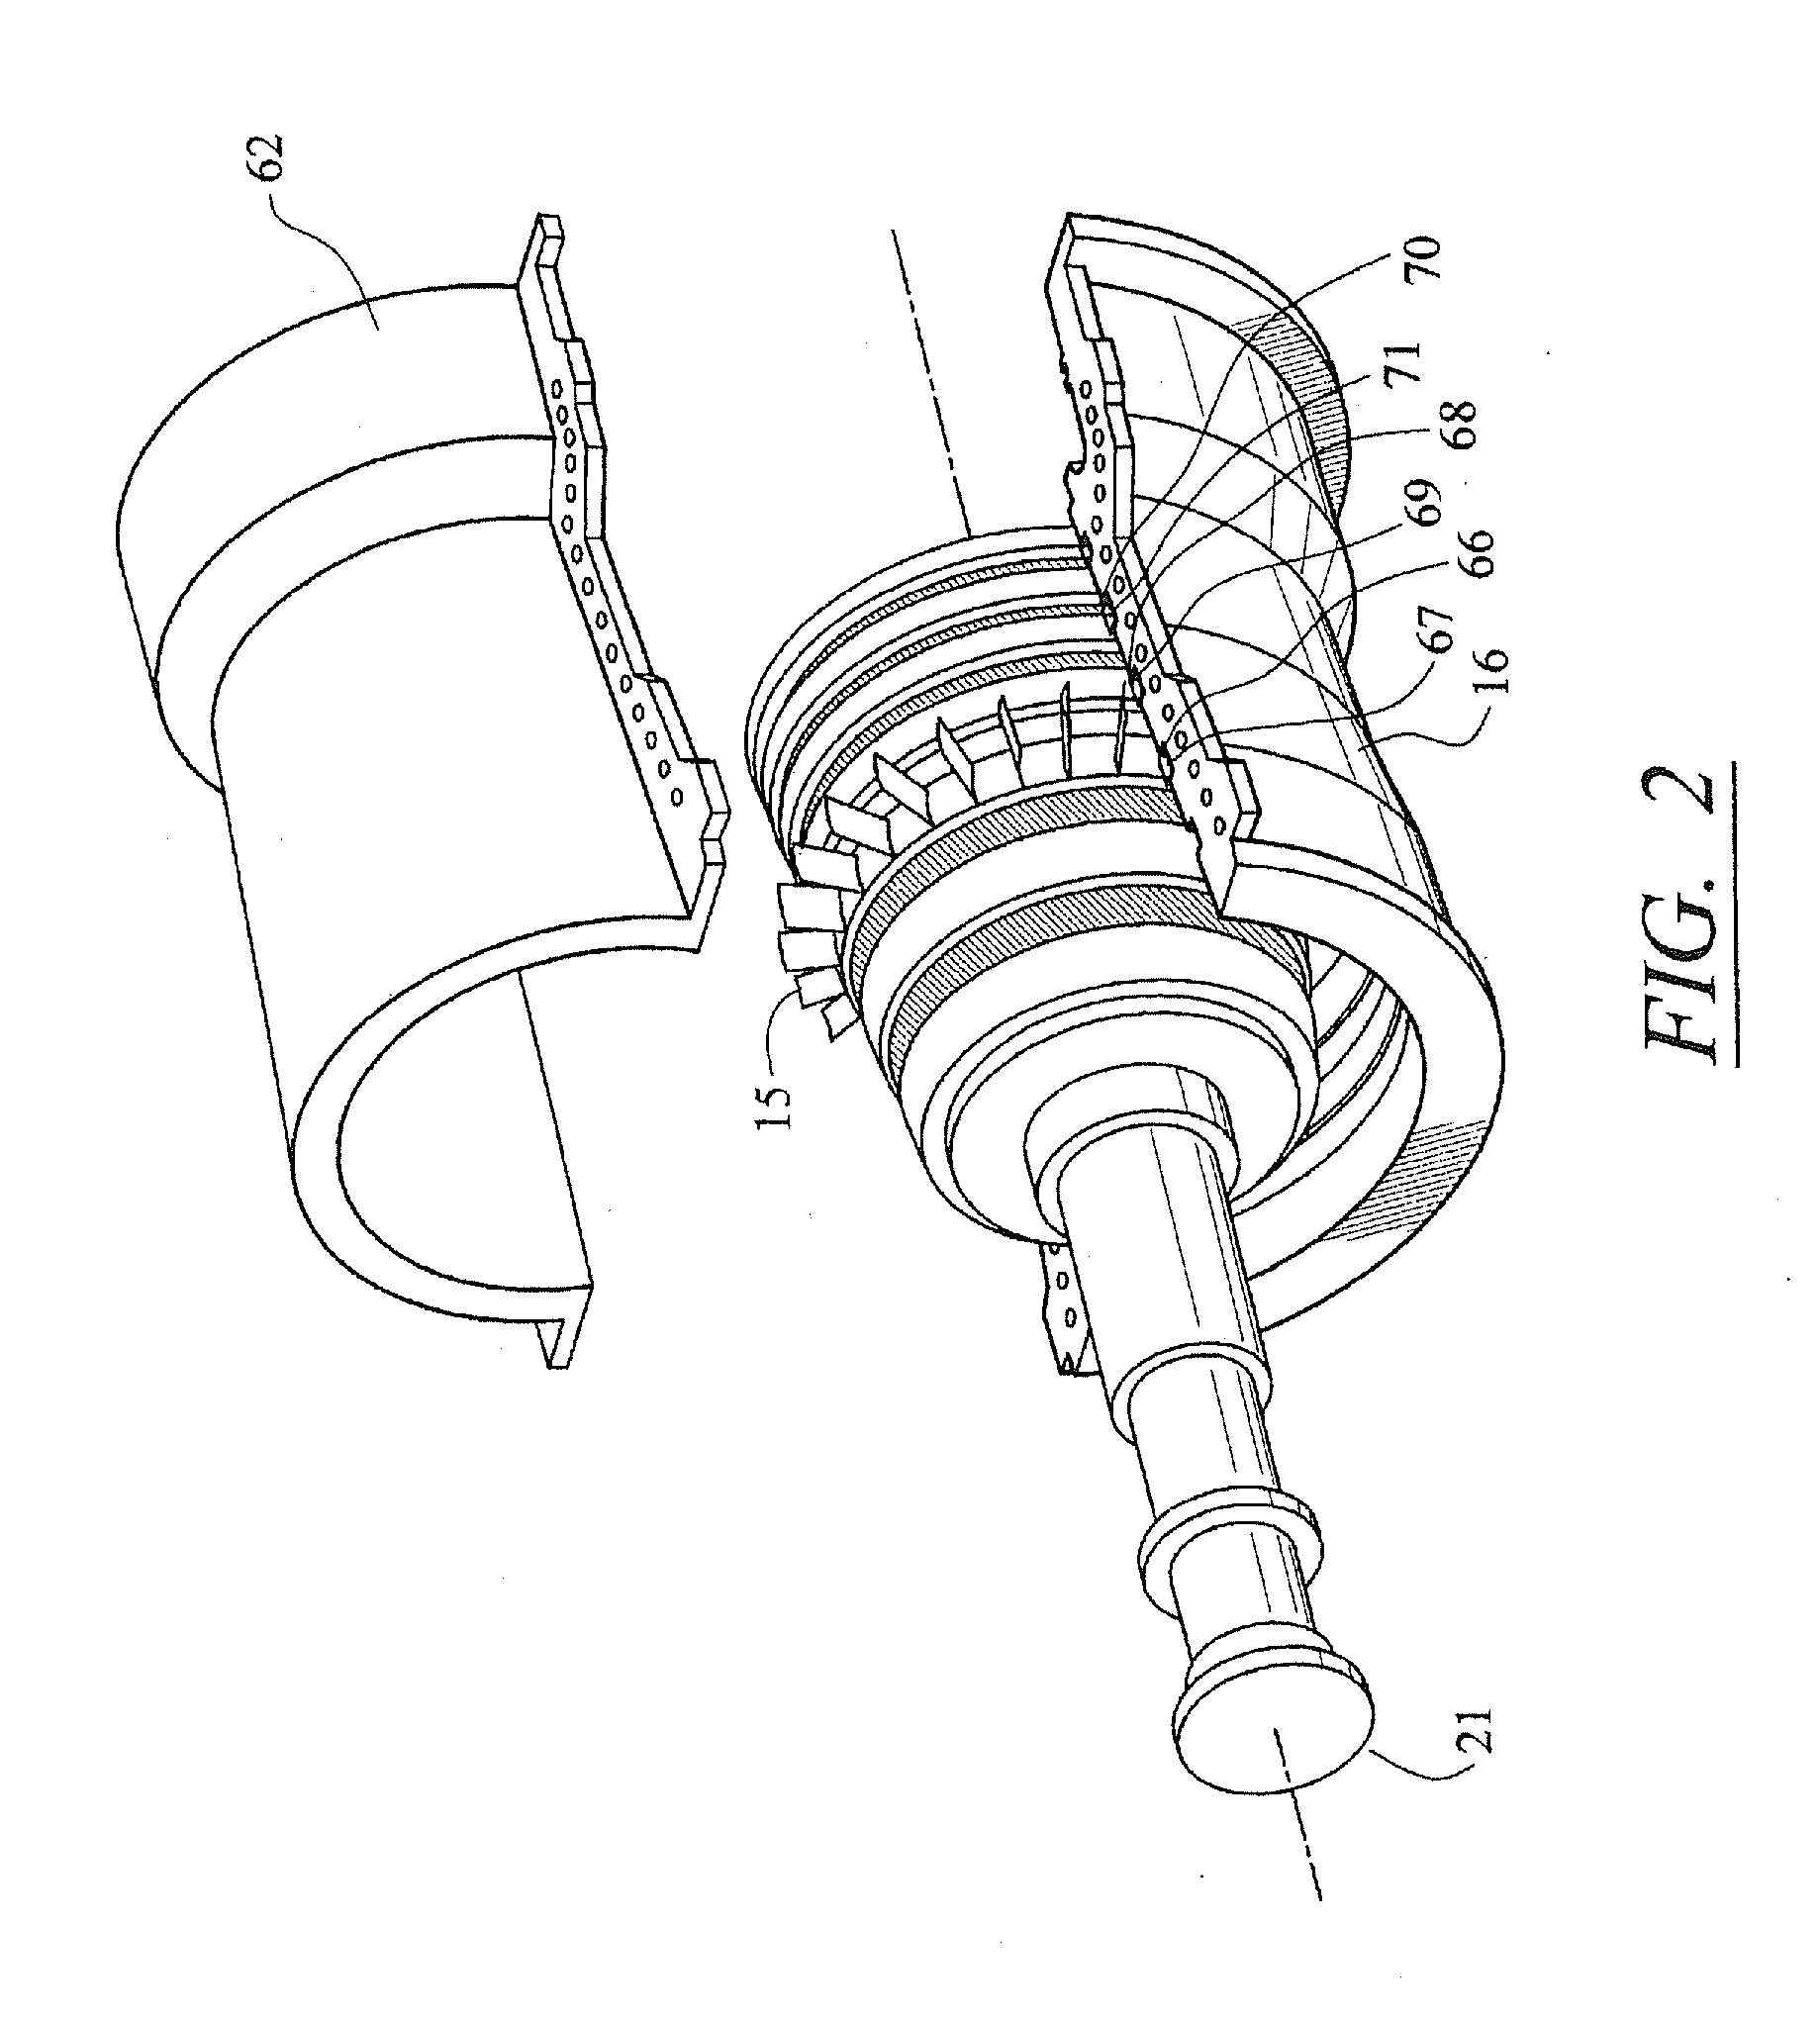 System for restoring turbine vane attachment systems in a turbine engine